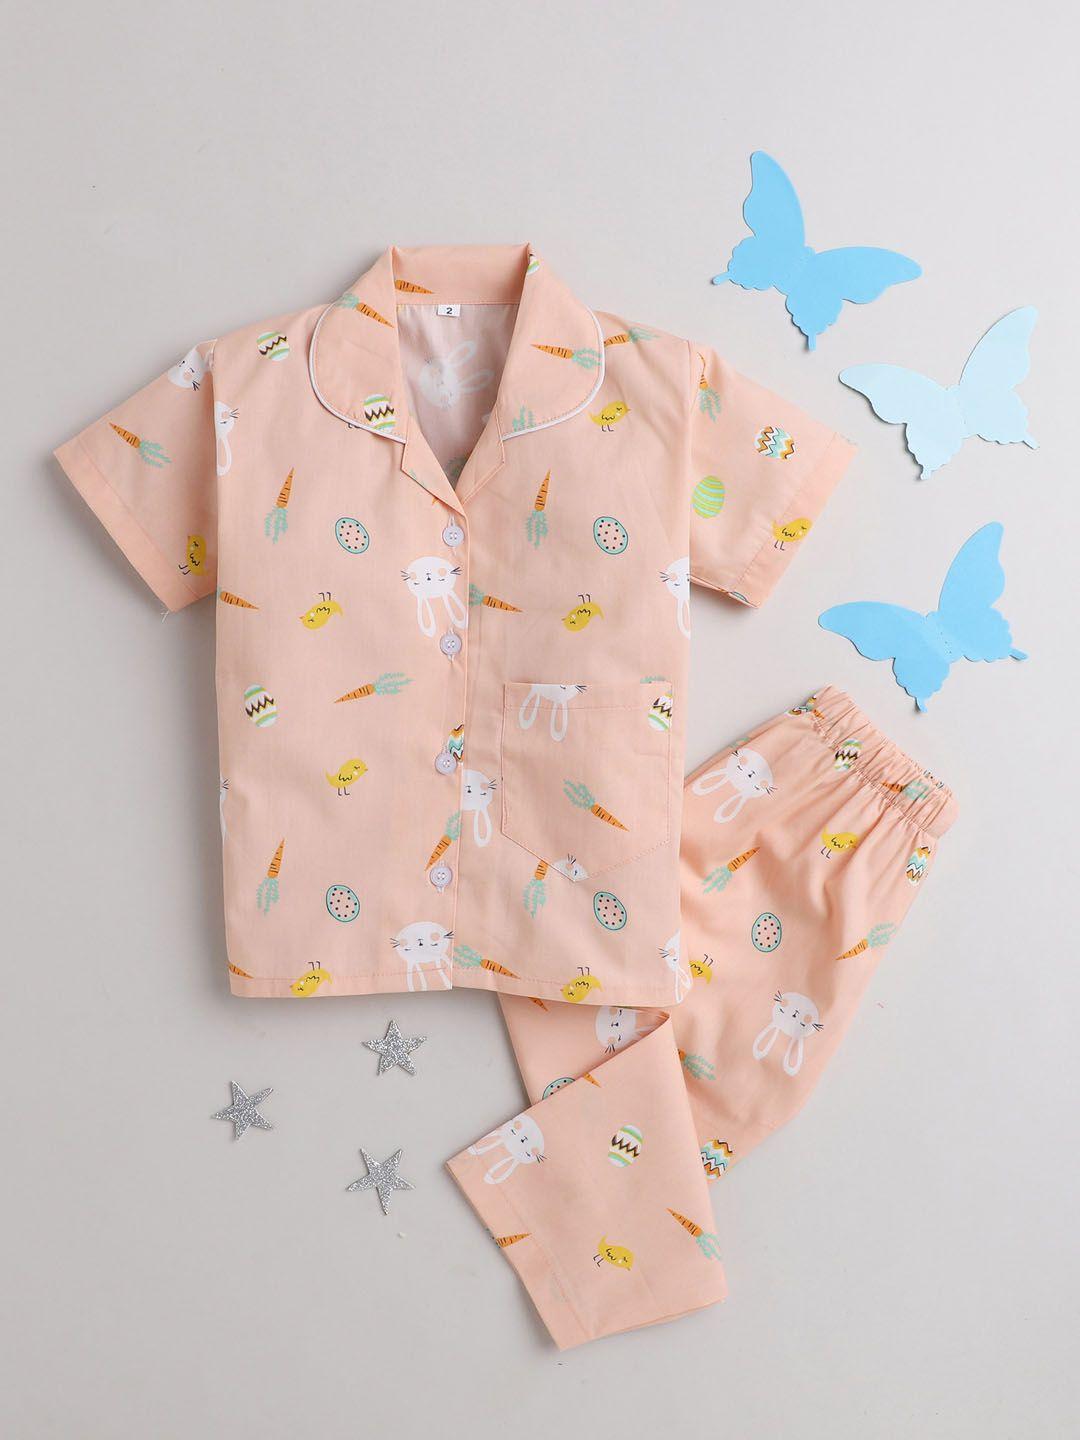 the magic wand unisex kids peach-coloured & white printed night suit